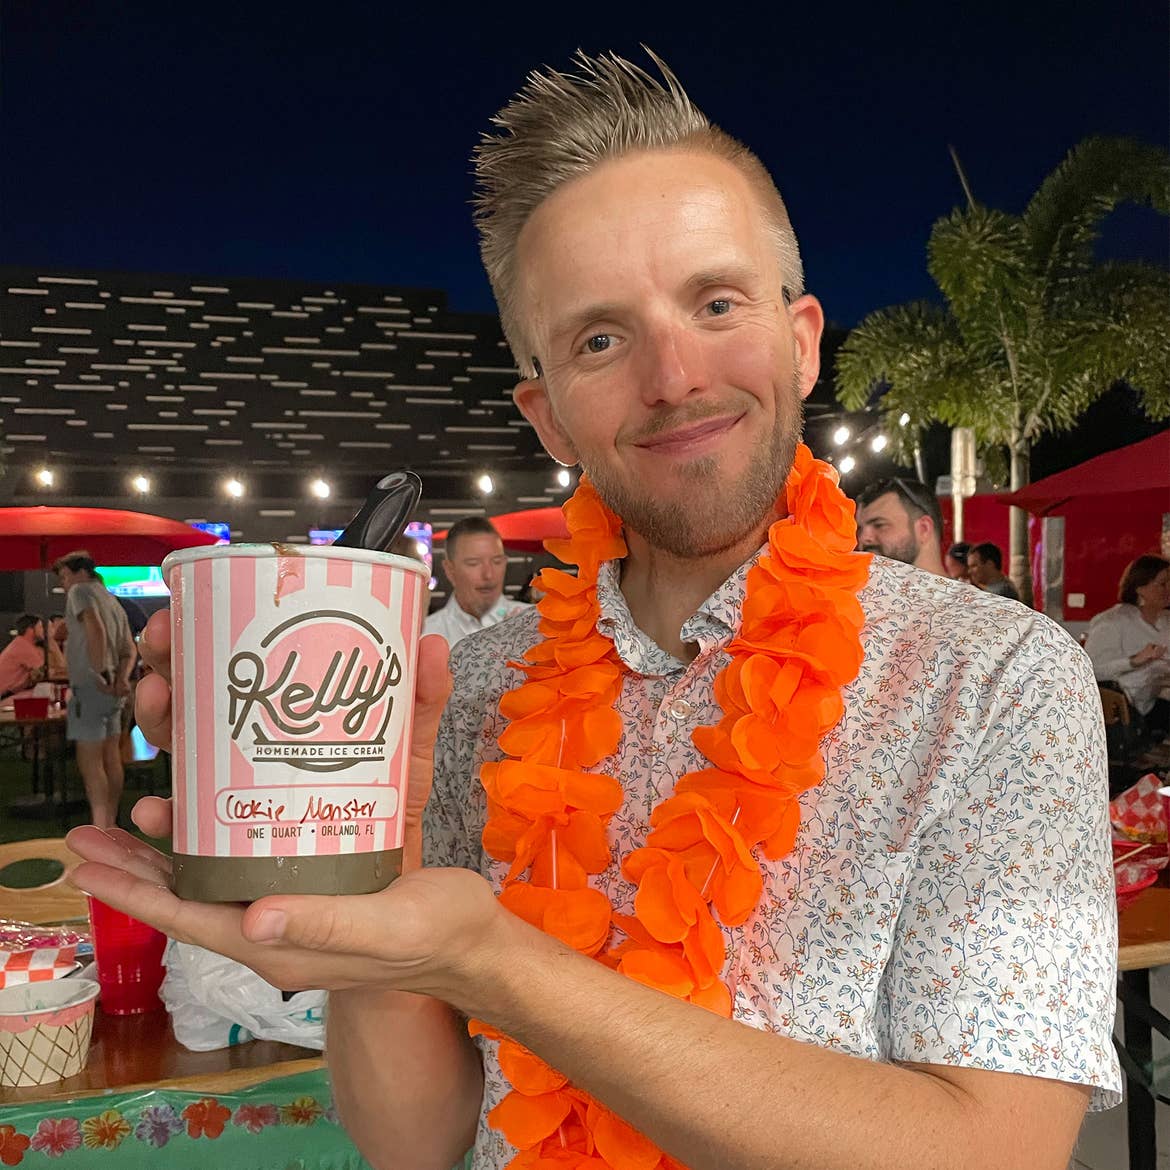 A man in a button-up shirt and orange lei holds a pint of pink and white striped ice cream outdoors.